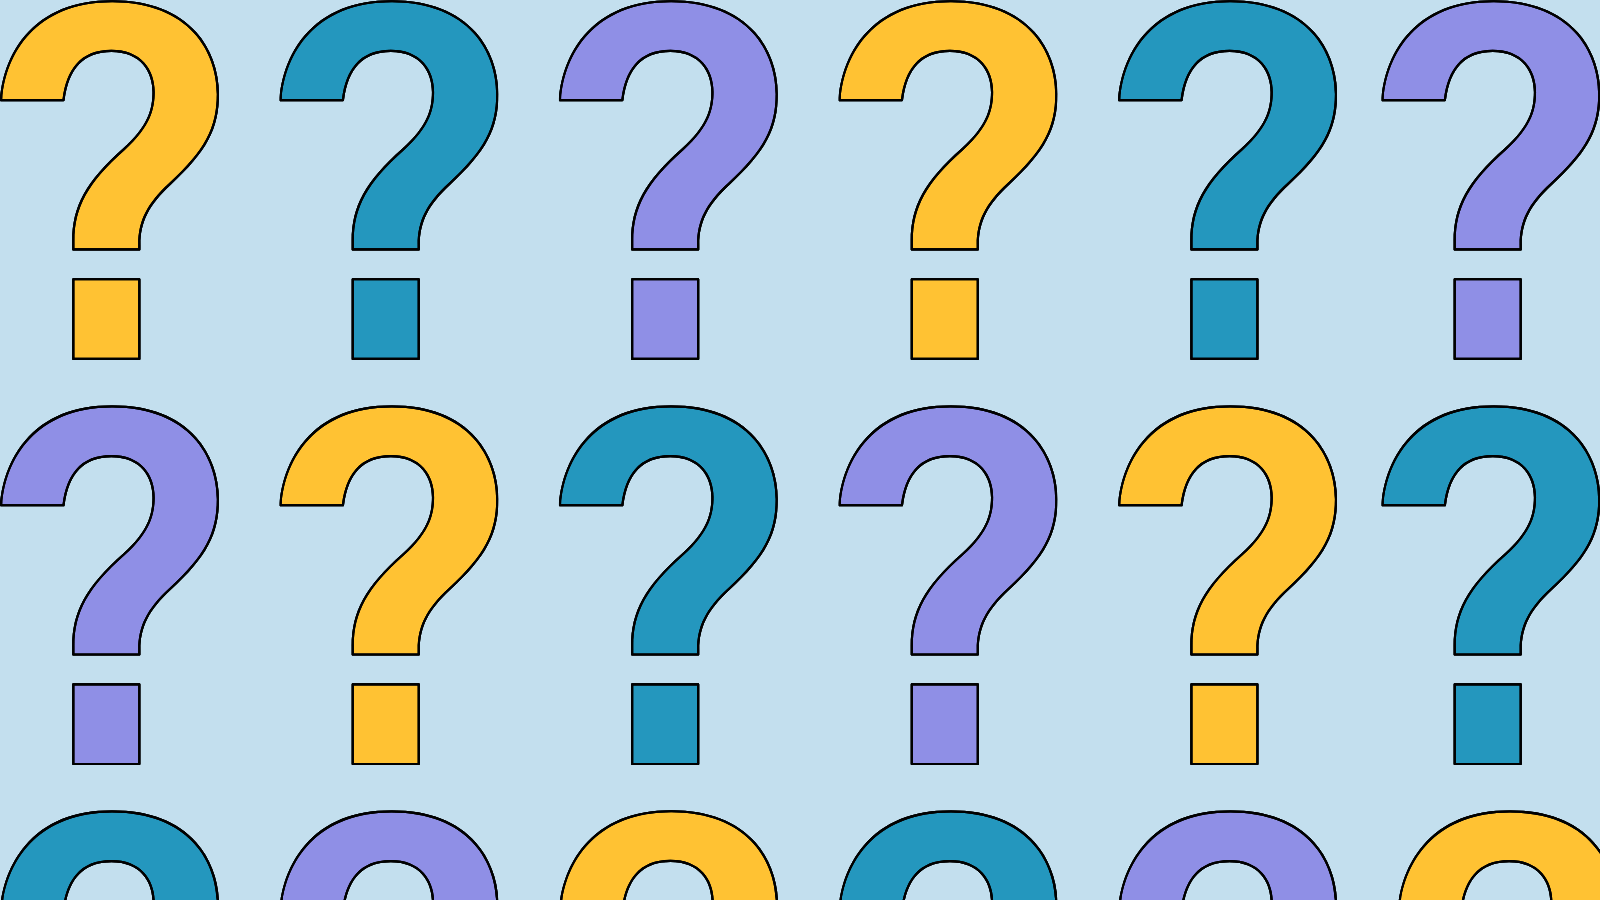 Three rows of question marks in alternating colors